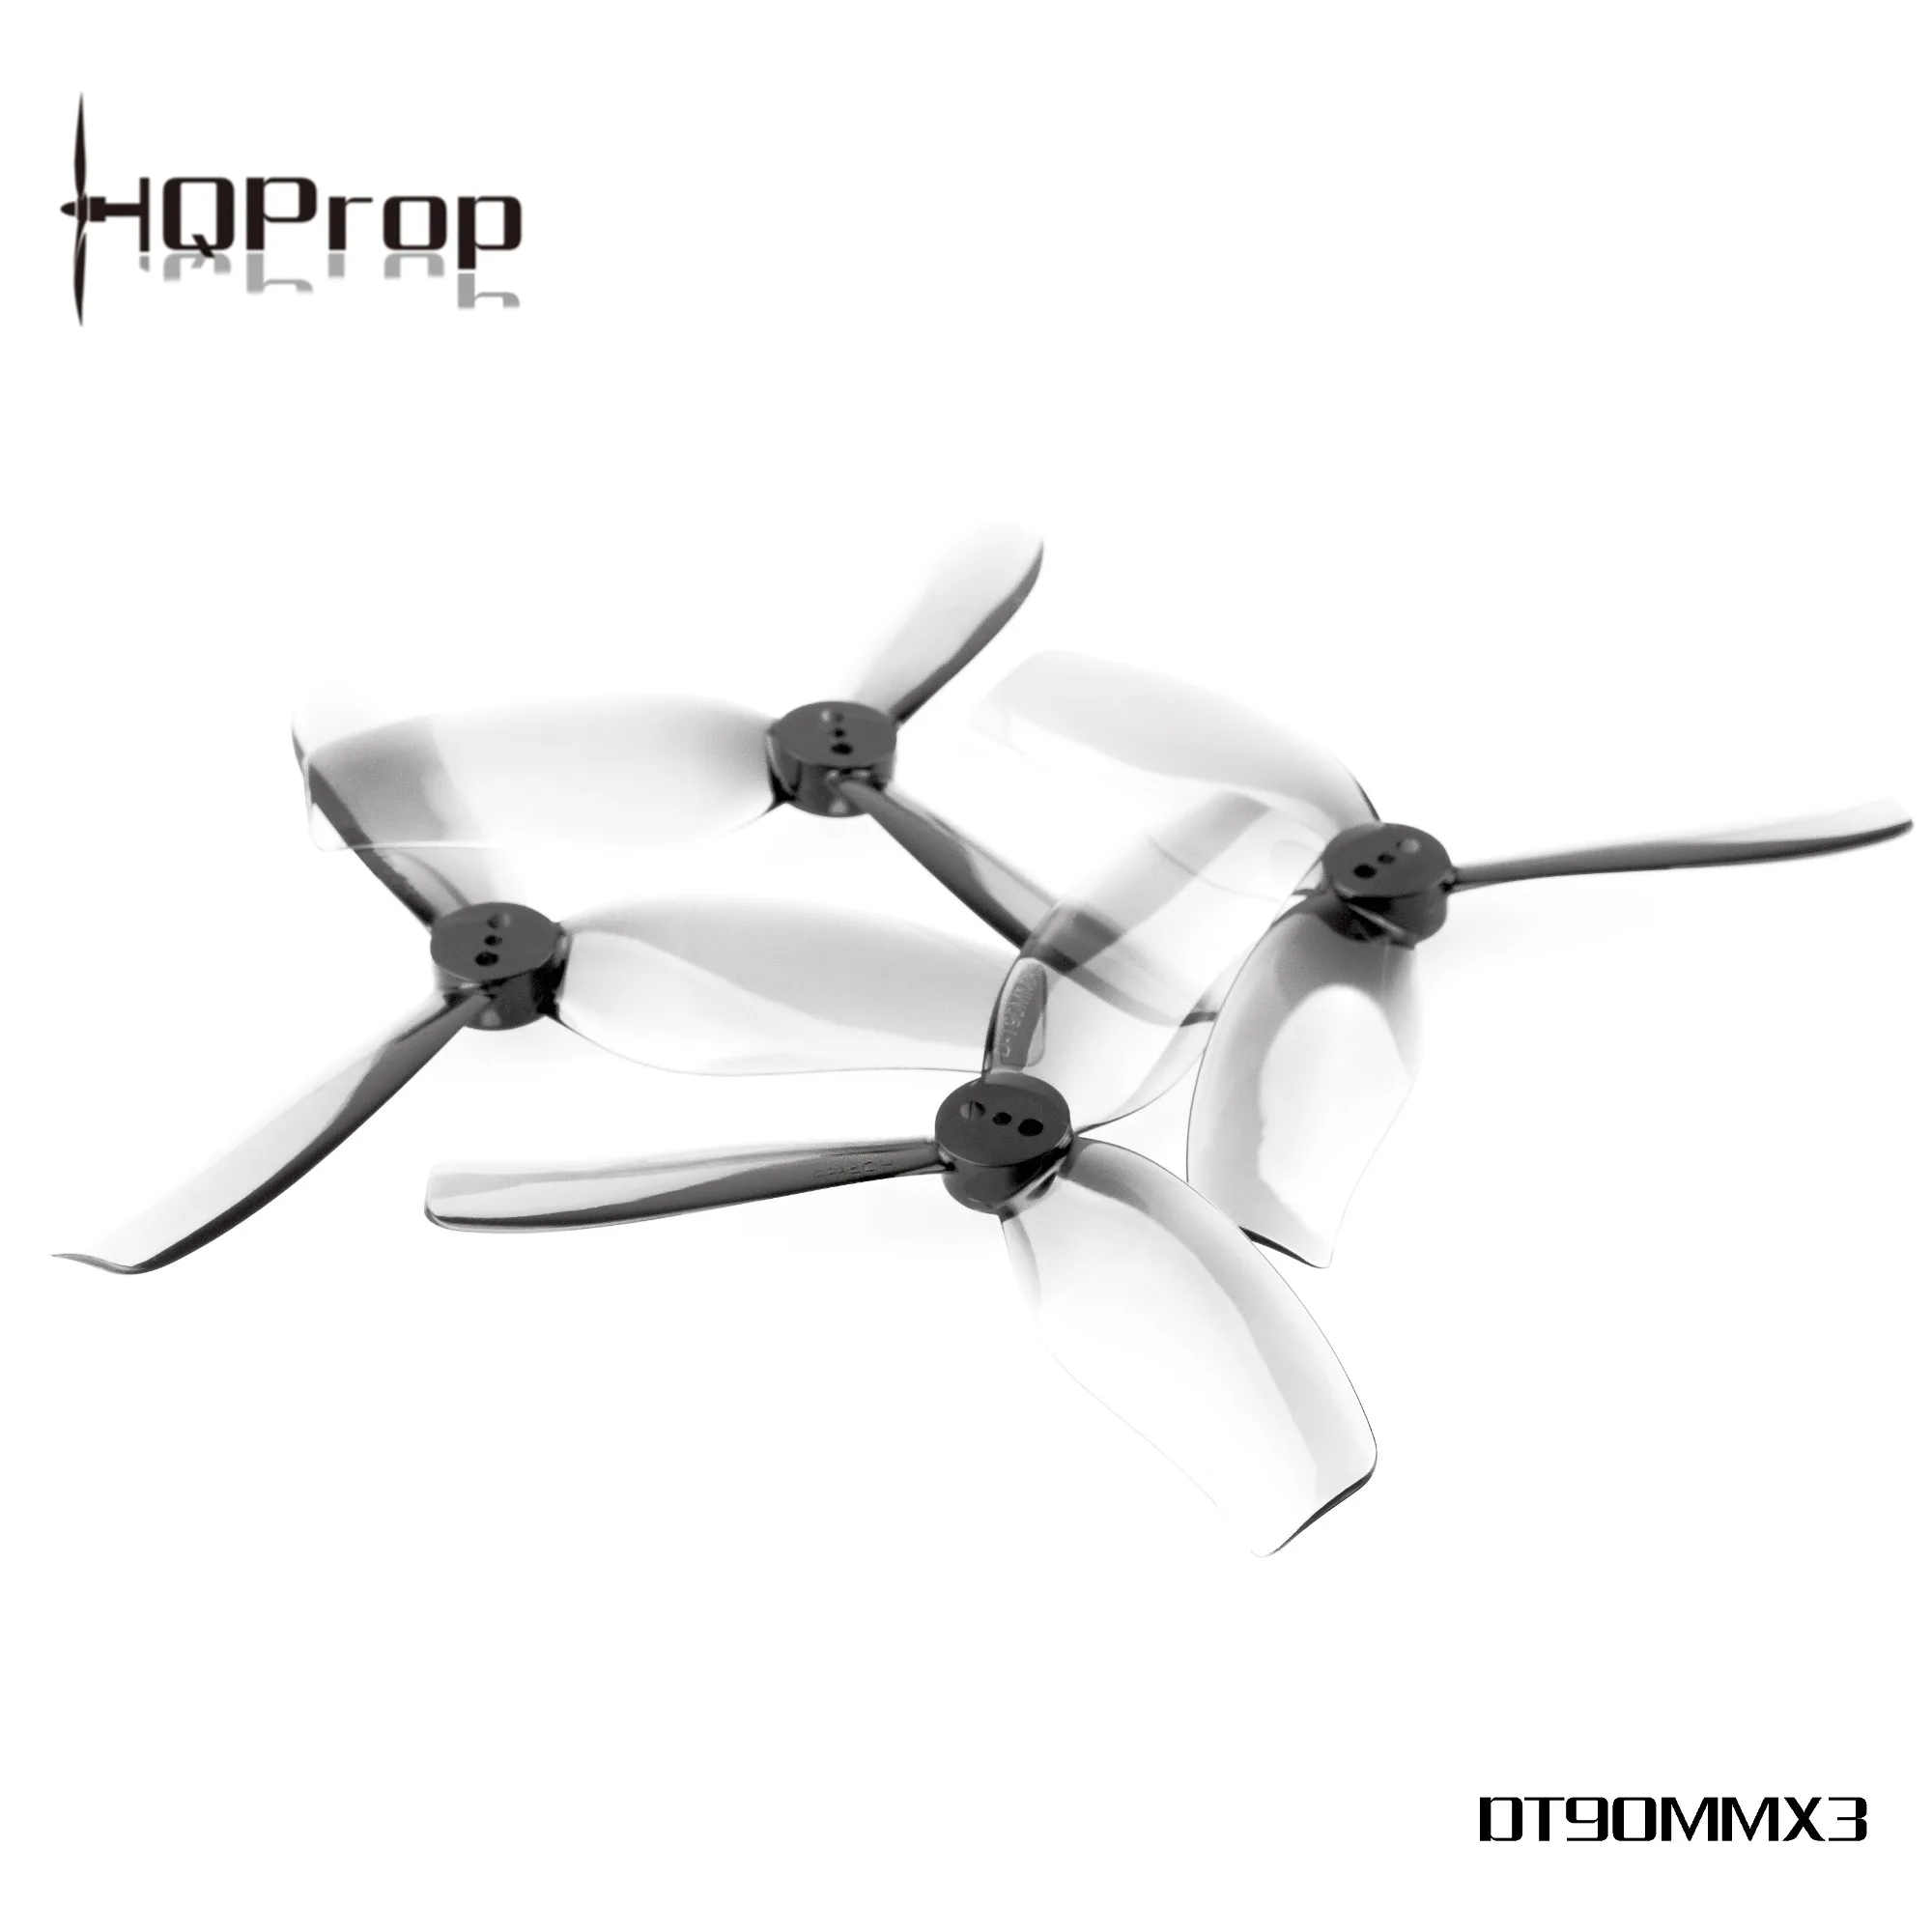 10Pairs HQProp Duct T90MMX3 for Cinewhoop Grey (2CW+2CCW) Poly Carbonate Hub Diameter 11mm FPV Drone